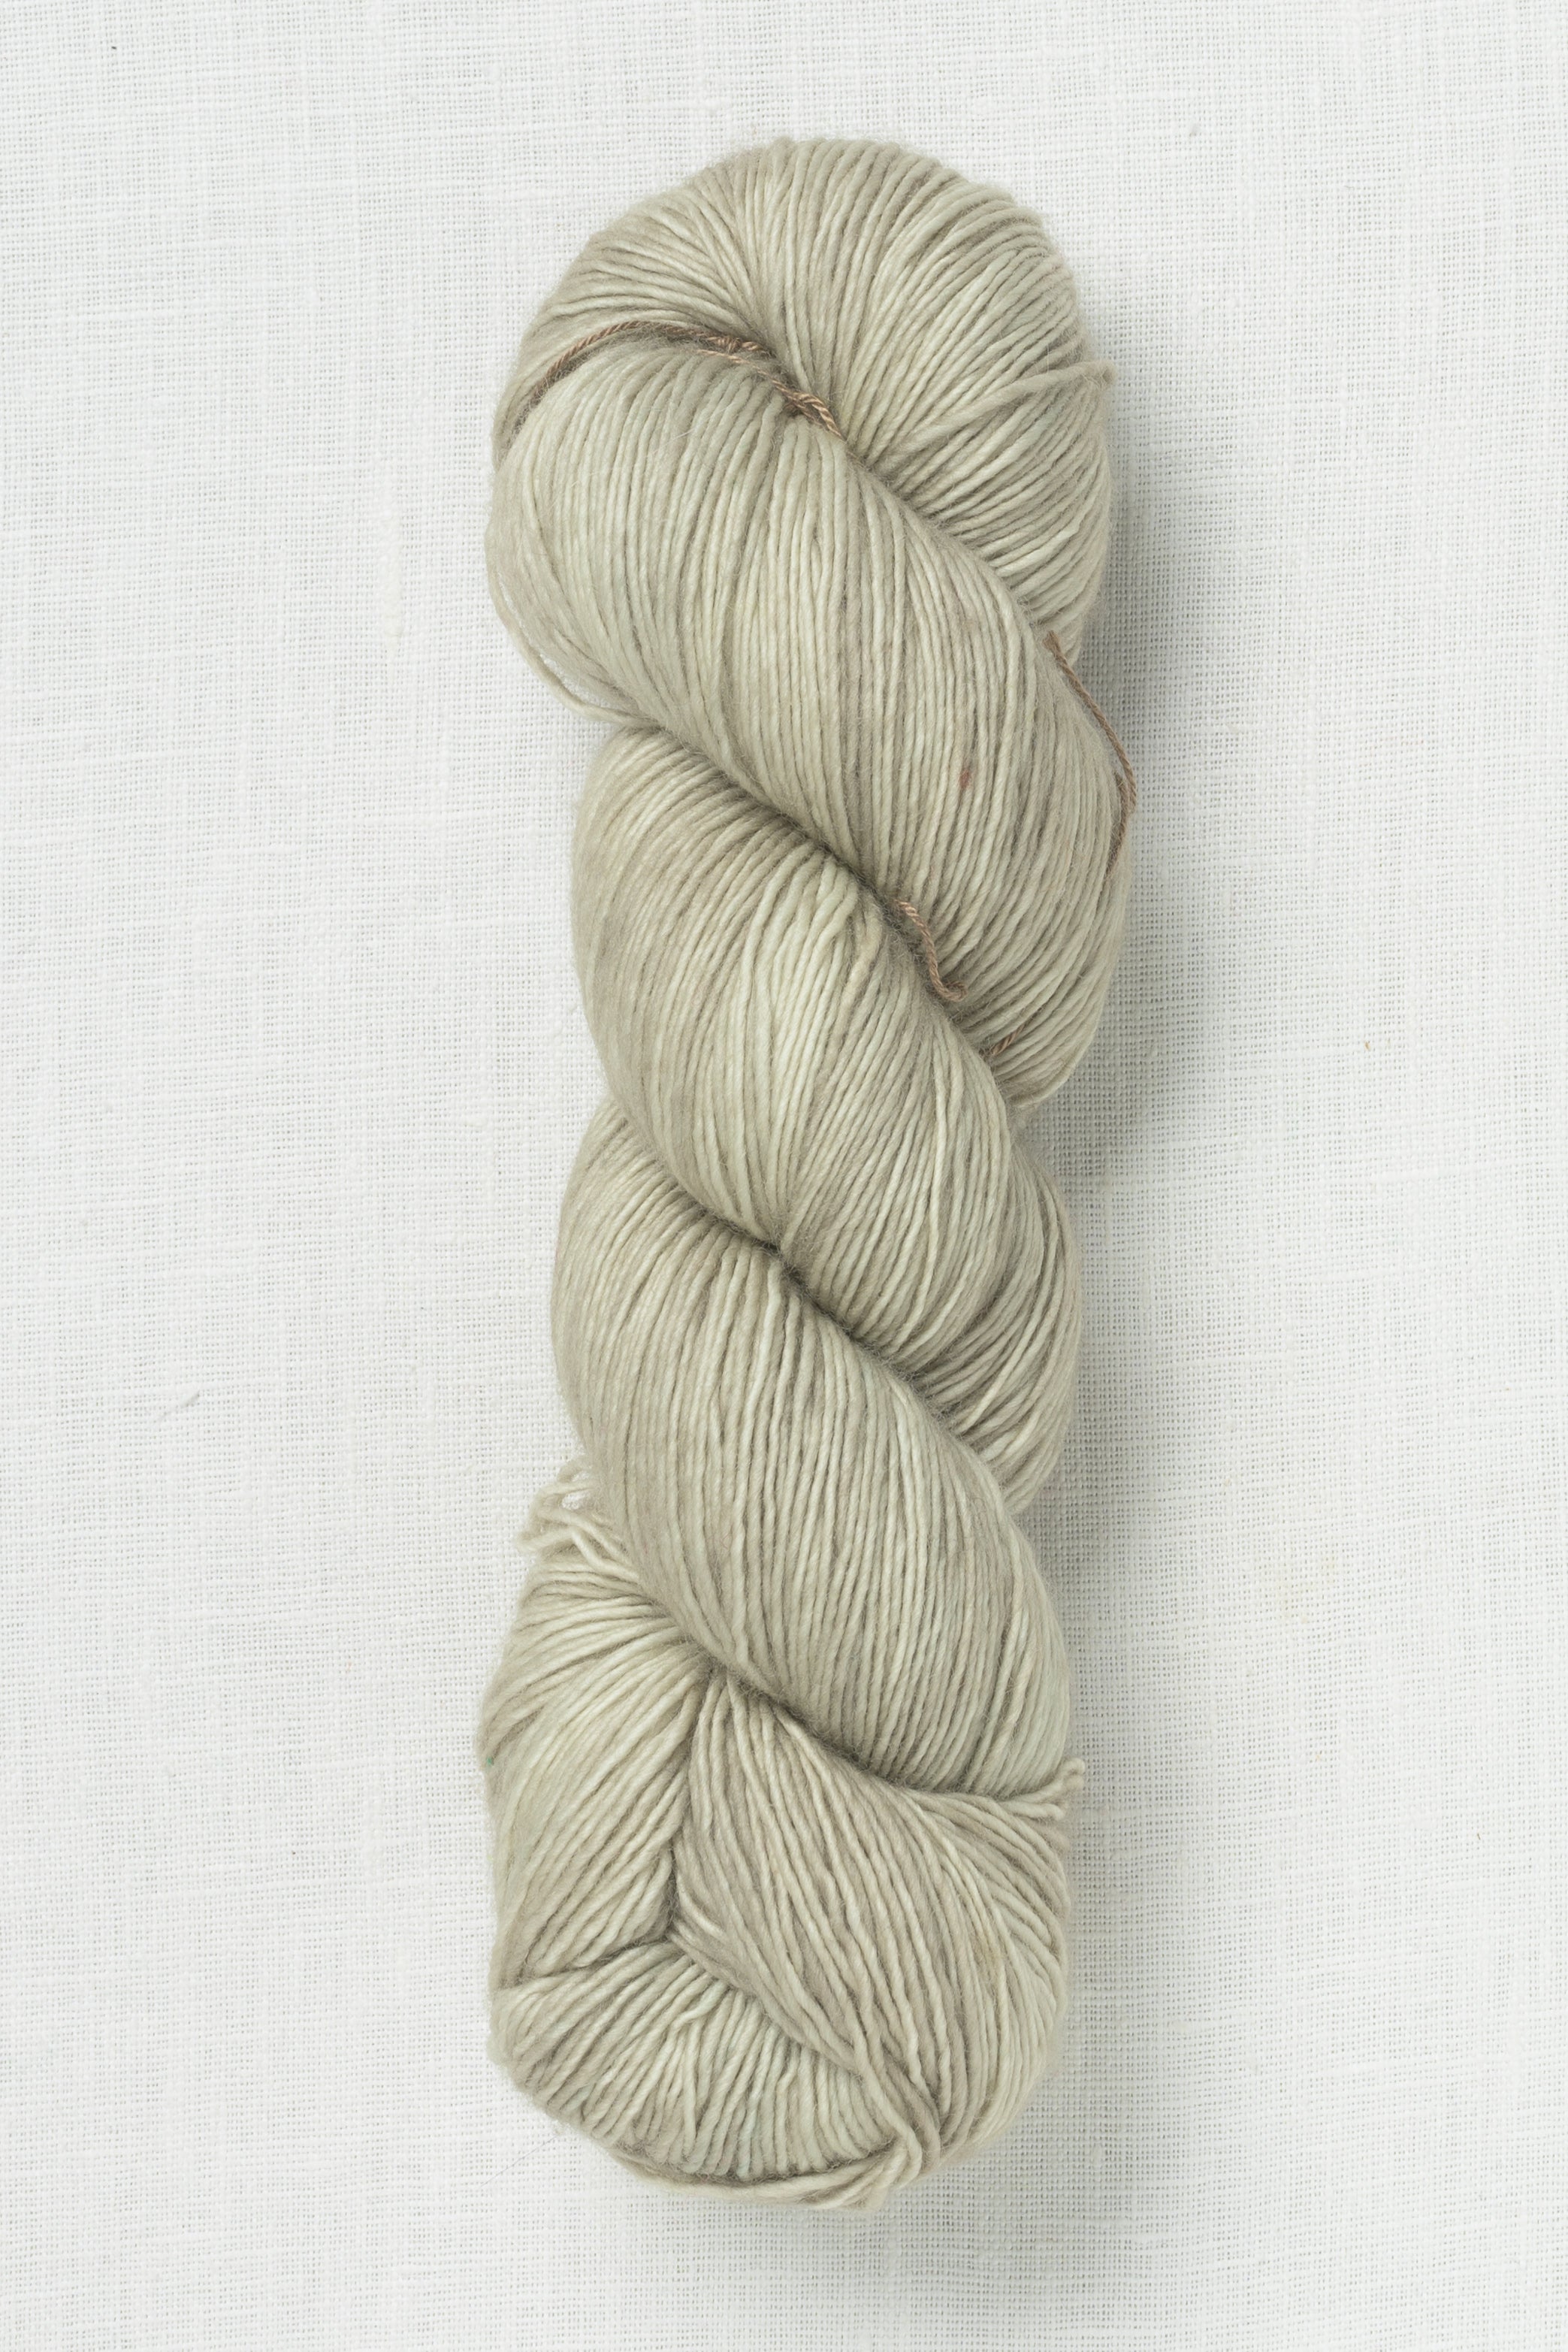 Madelinetosh Tosh DK Ghost – Wool and Company